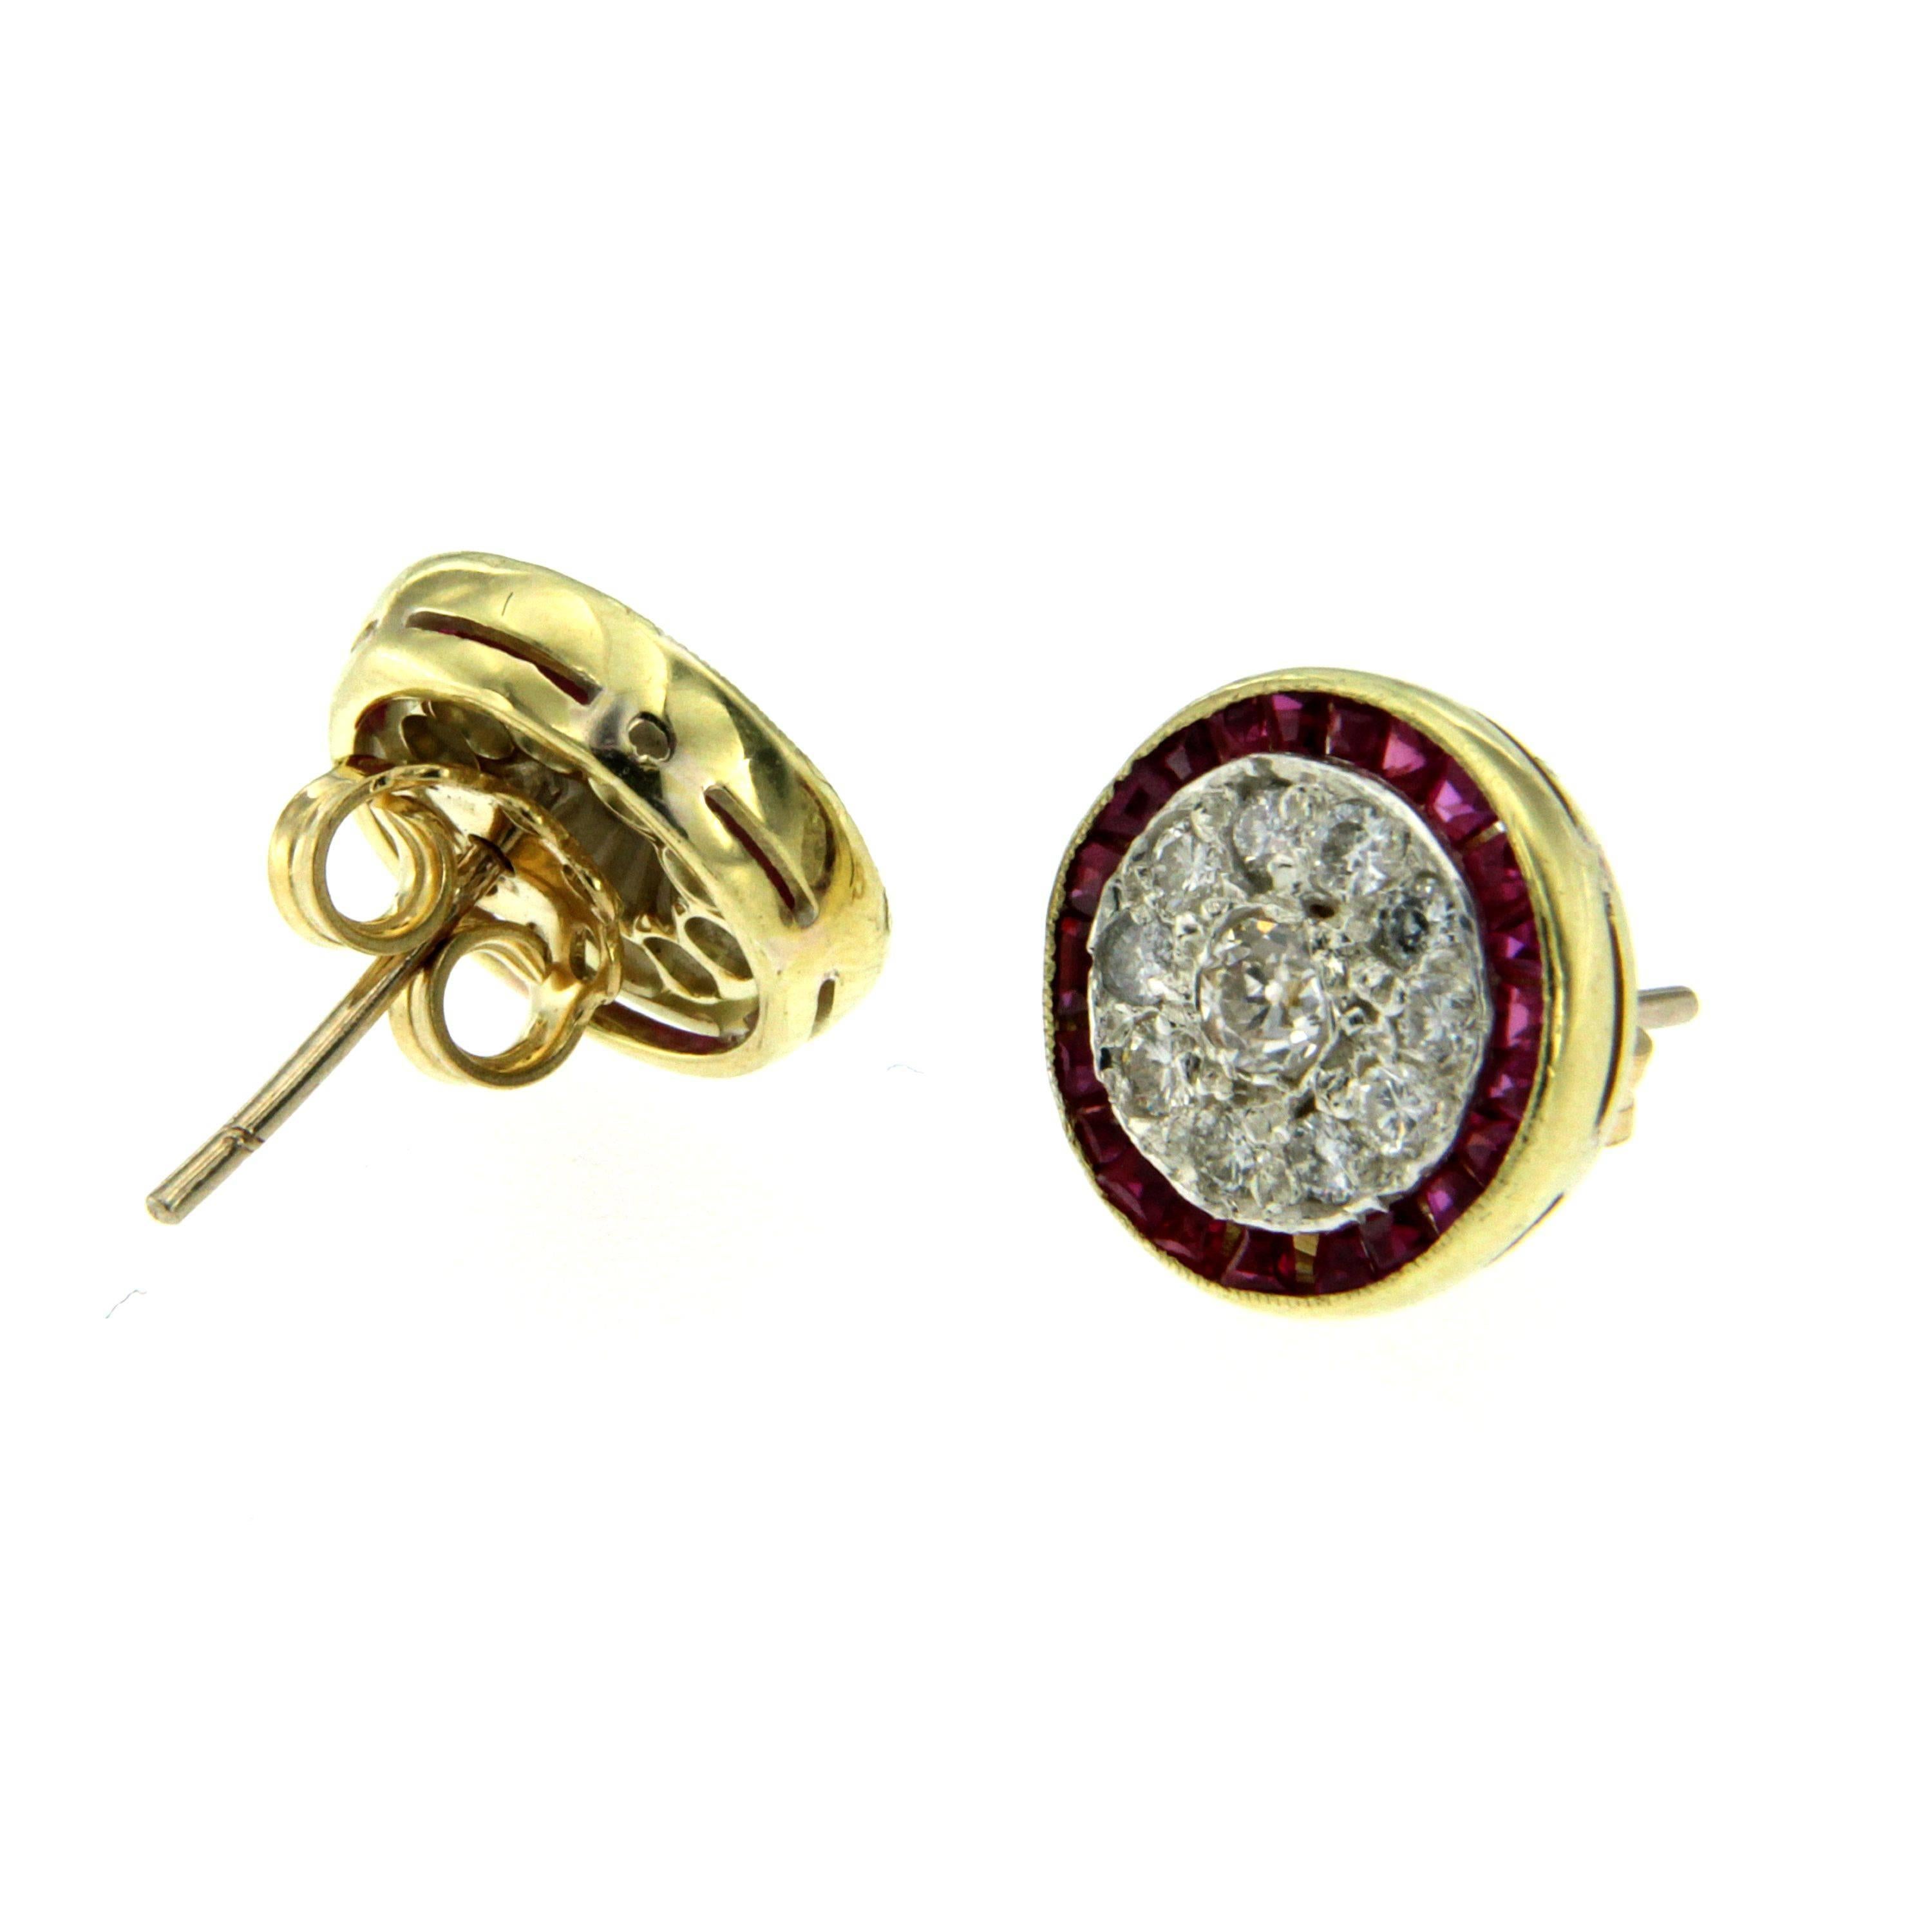 These exquisite stud earrings are adorned at the center with approx. 0.80 cts of round brilliant cut diamonds flanked by custom cut Ruby having a total weight of 0.40 carats. Handcrafted in 18k yellow Gold. Circa 1930

CONDITION: Pre-owned -